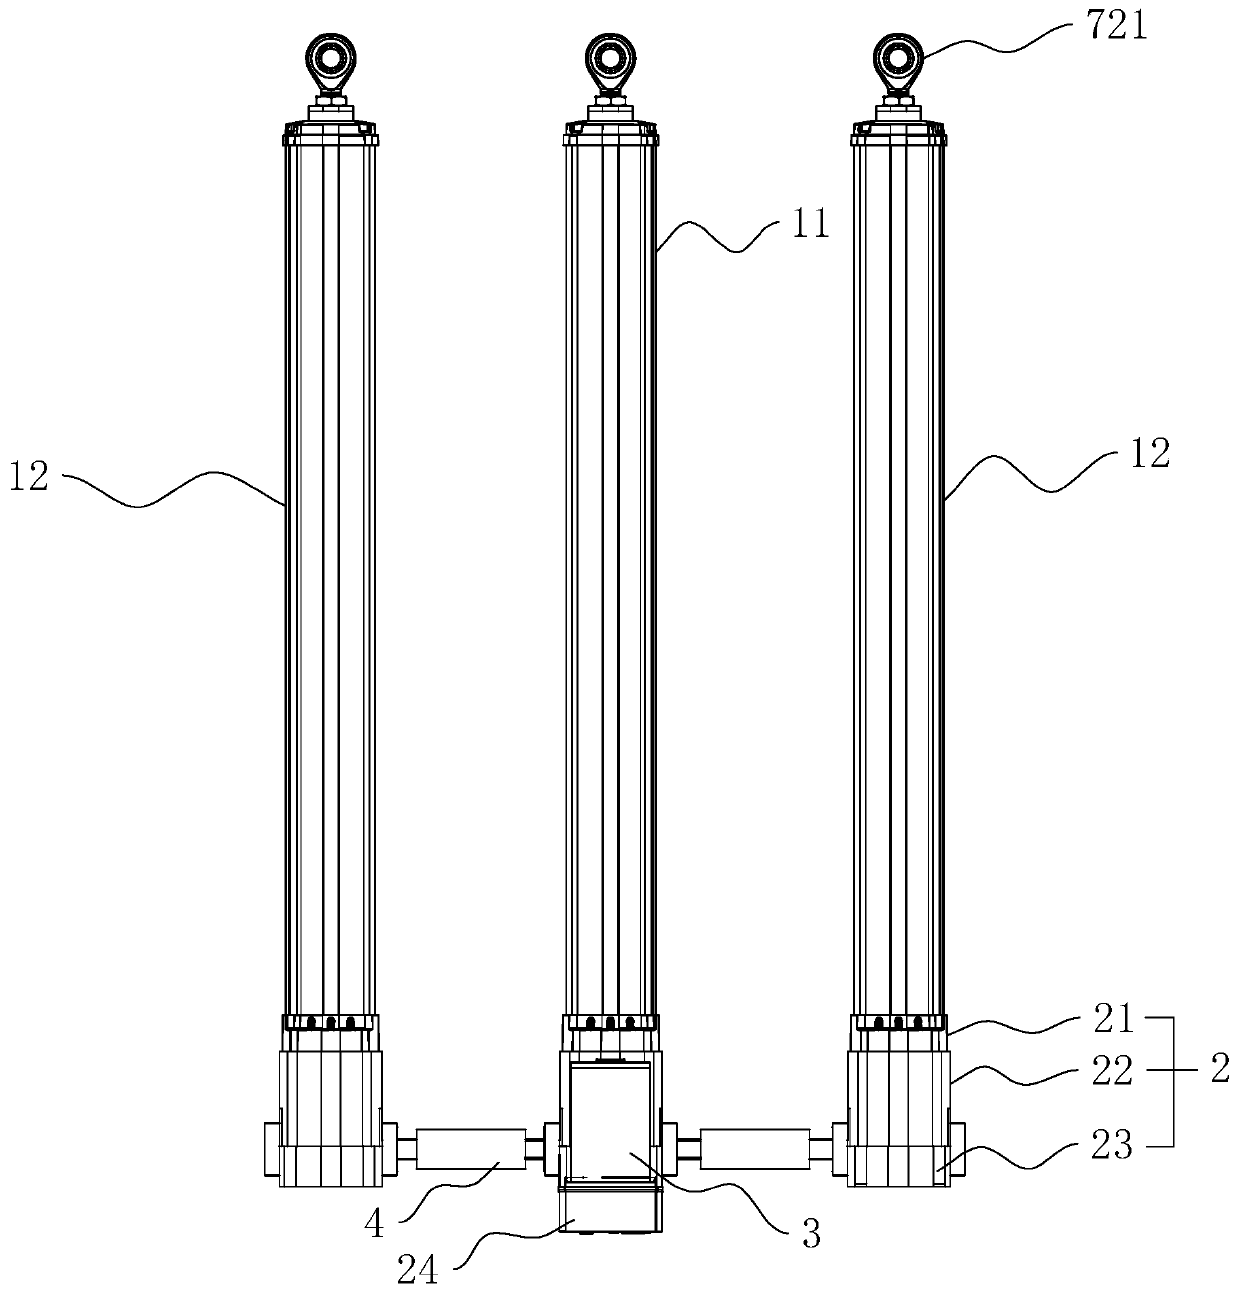 Multi-connection electric push rod structure